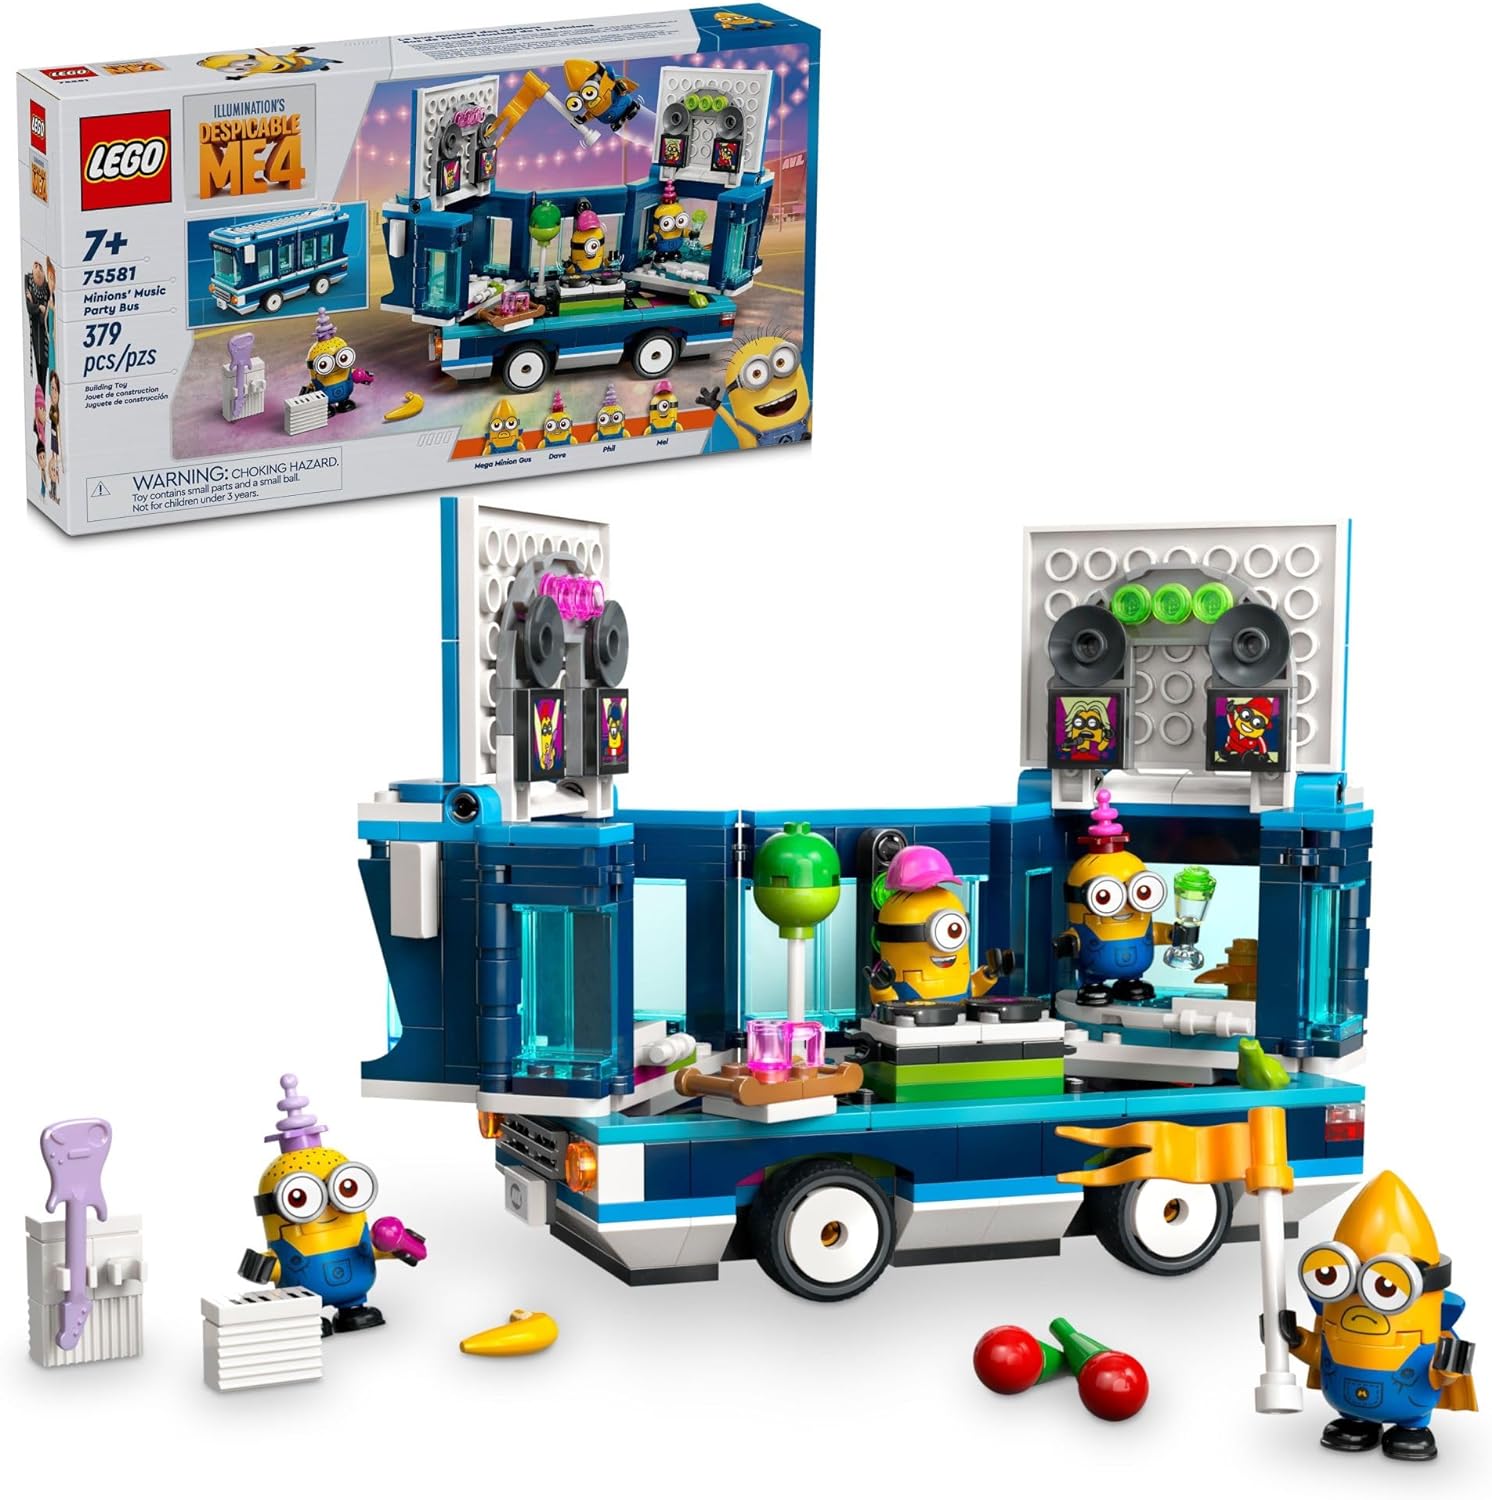 LEGO Despicable Me 4 Minions and Gru_s Family Mansion_ Minions Toy House and Tree Playset from Movie